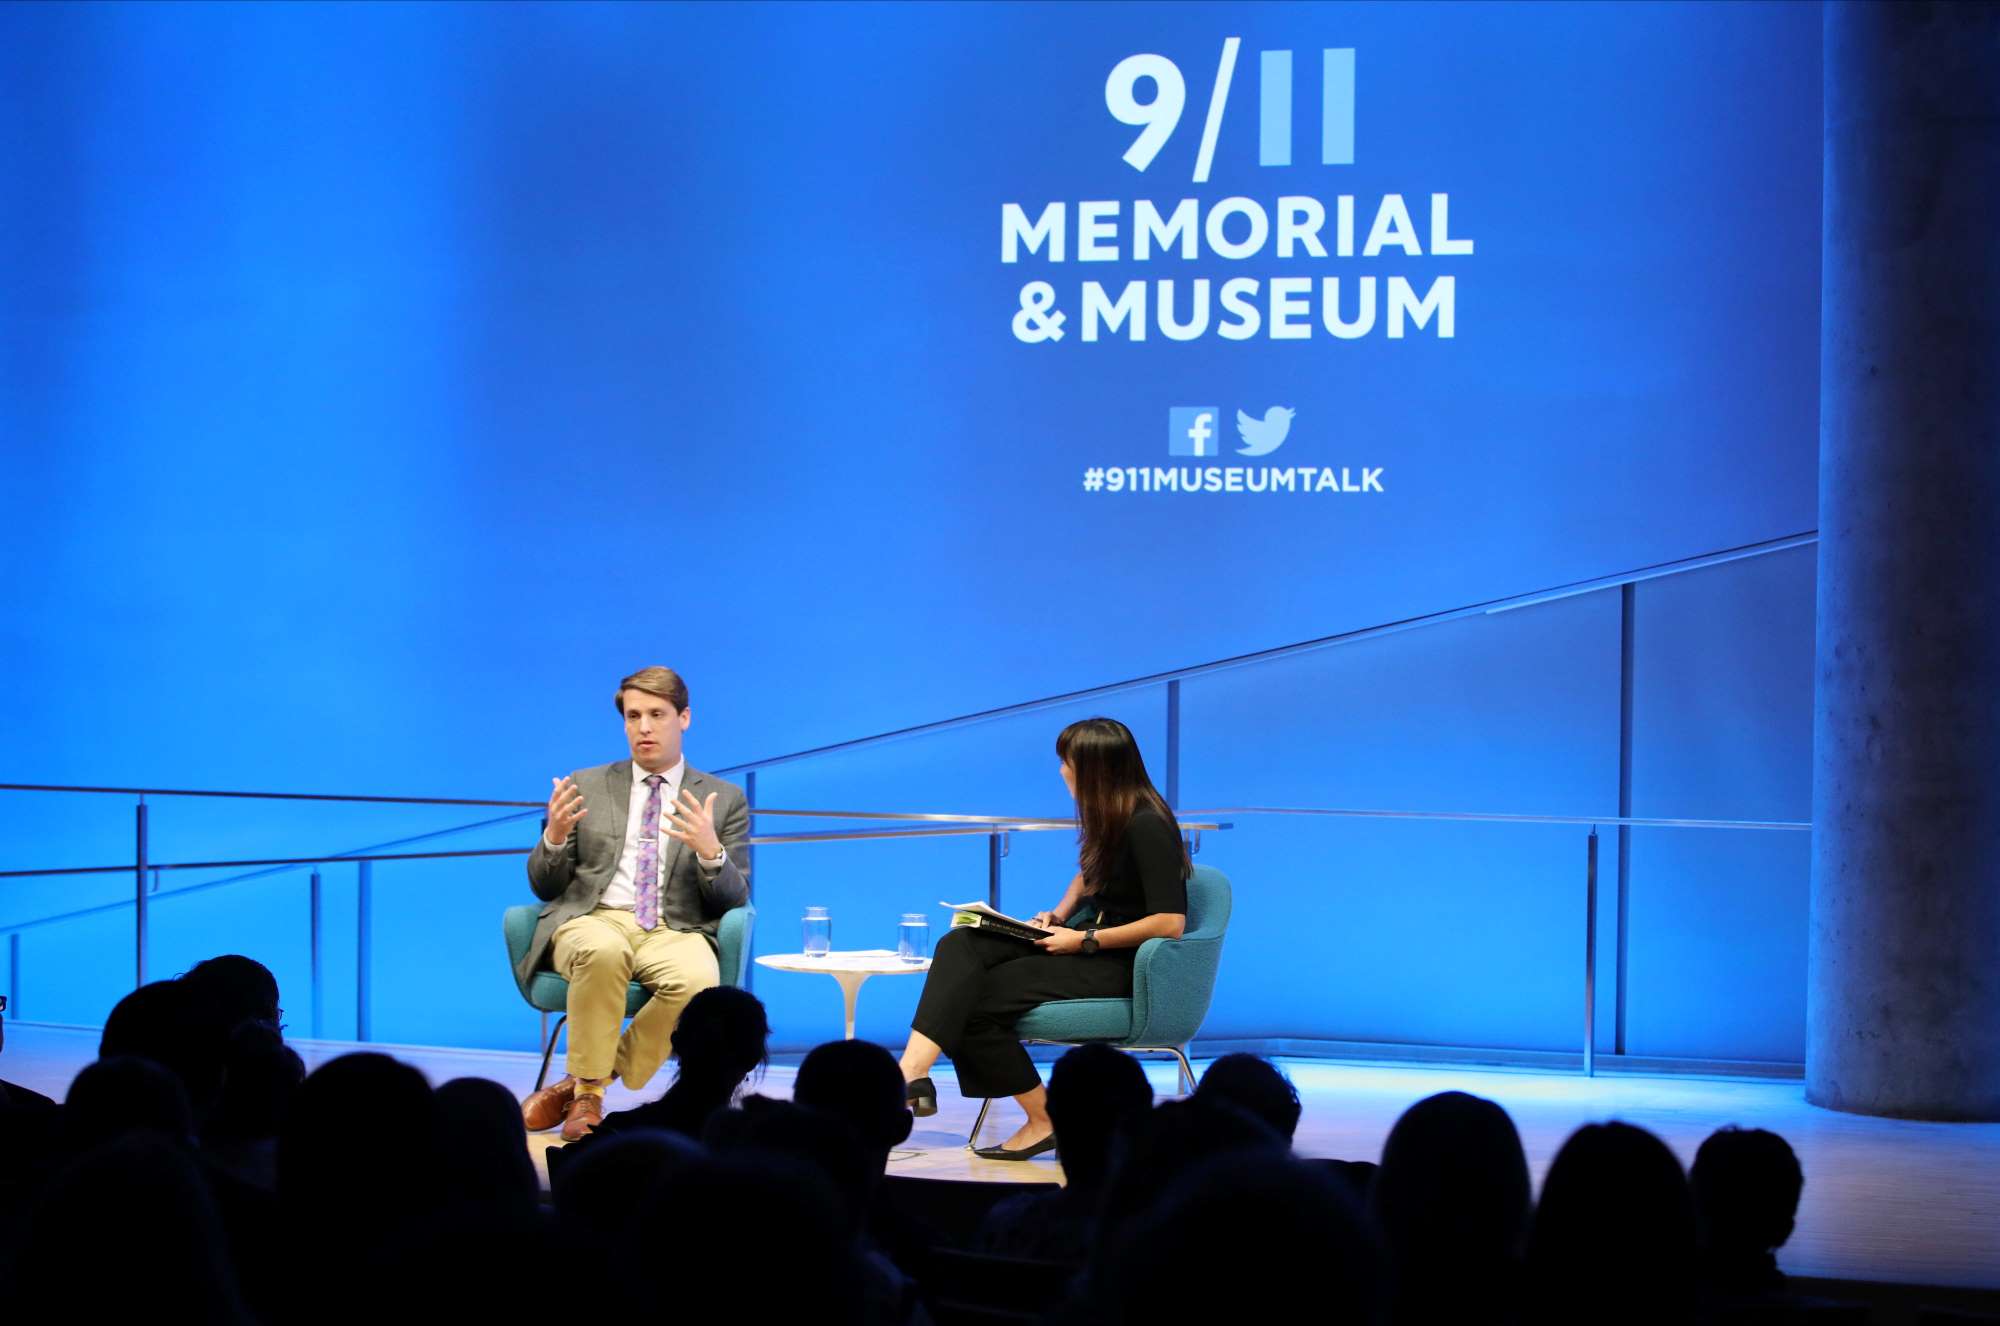 This wide-angle photo of the Museum Auditorium shows journalist and historian Garrett Graff seated onstage with the woman who is hosting the public program “Only Plane in the Sky. Graff is gesturing with both hands as he looks towards the audience, whose heads are silhouetted in the foreground. A wall behind Graff is lit blue and features the logo of the 9/11 Memorial & Museum.